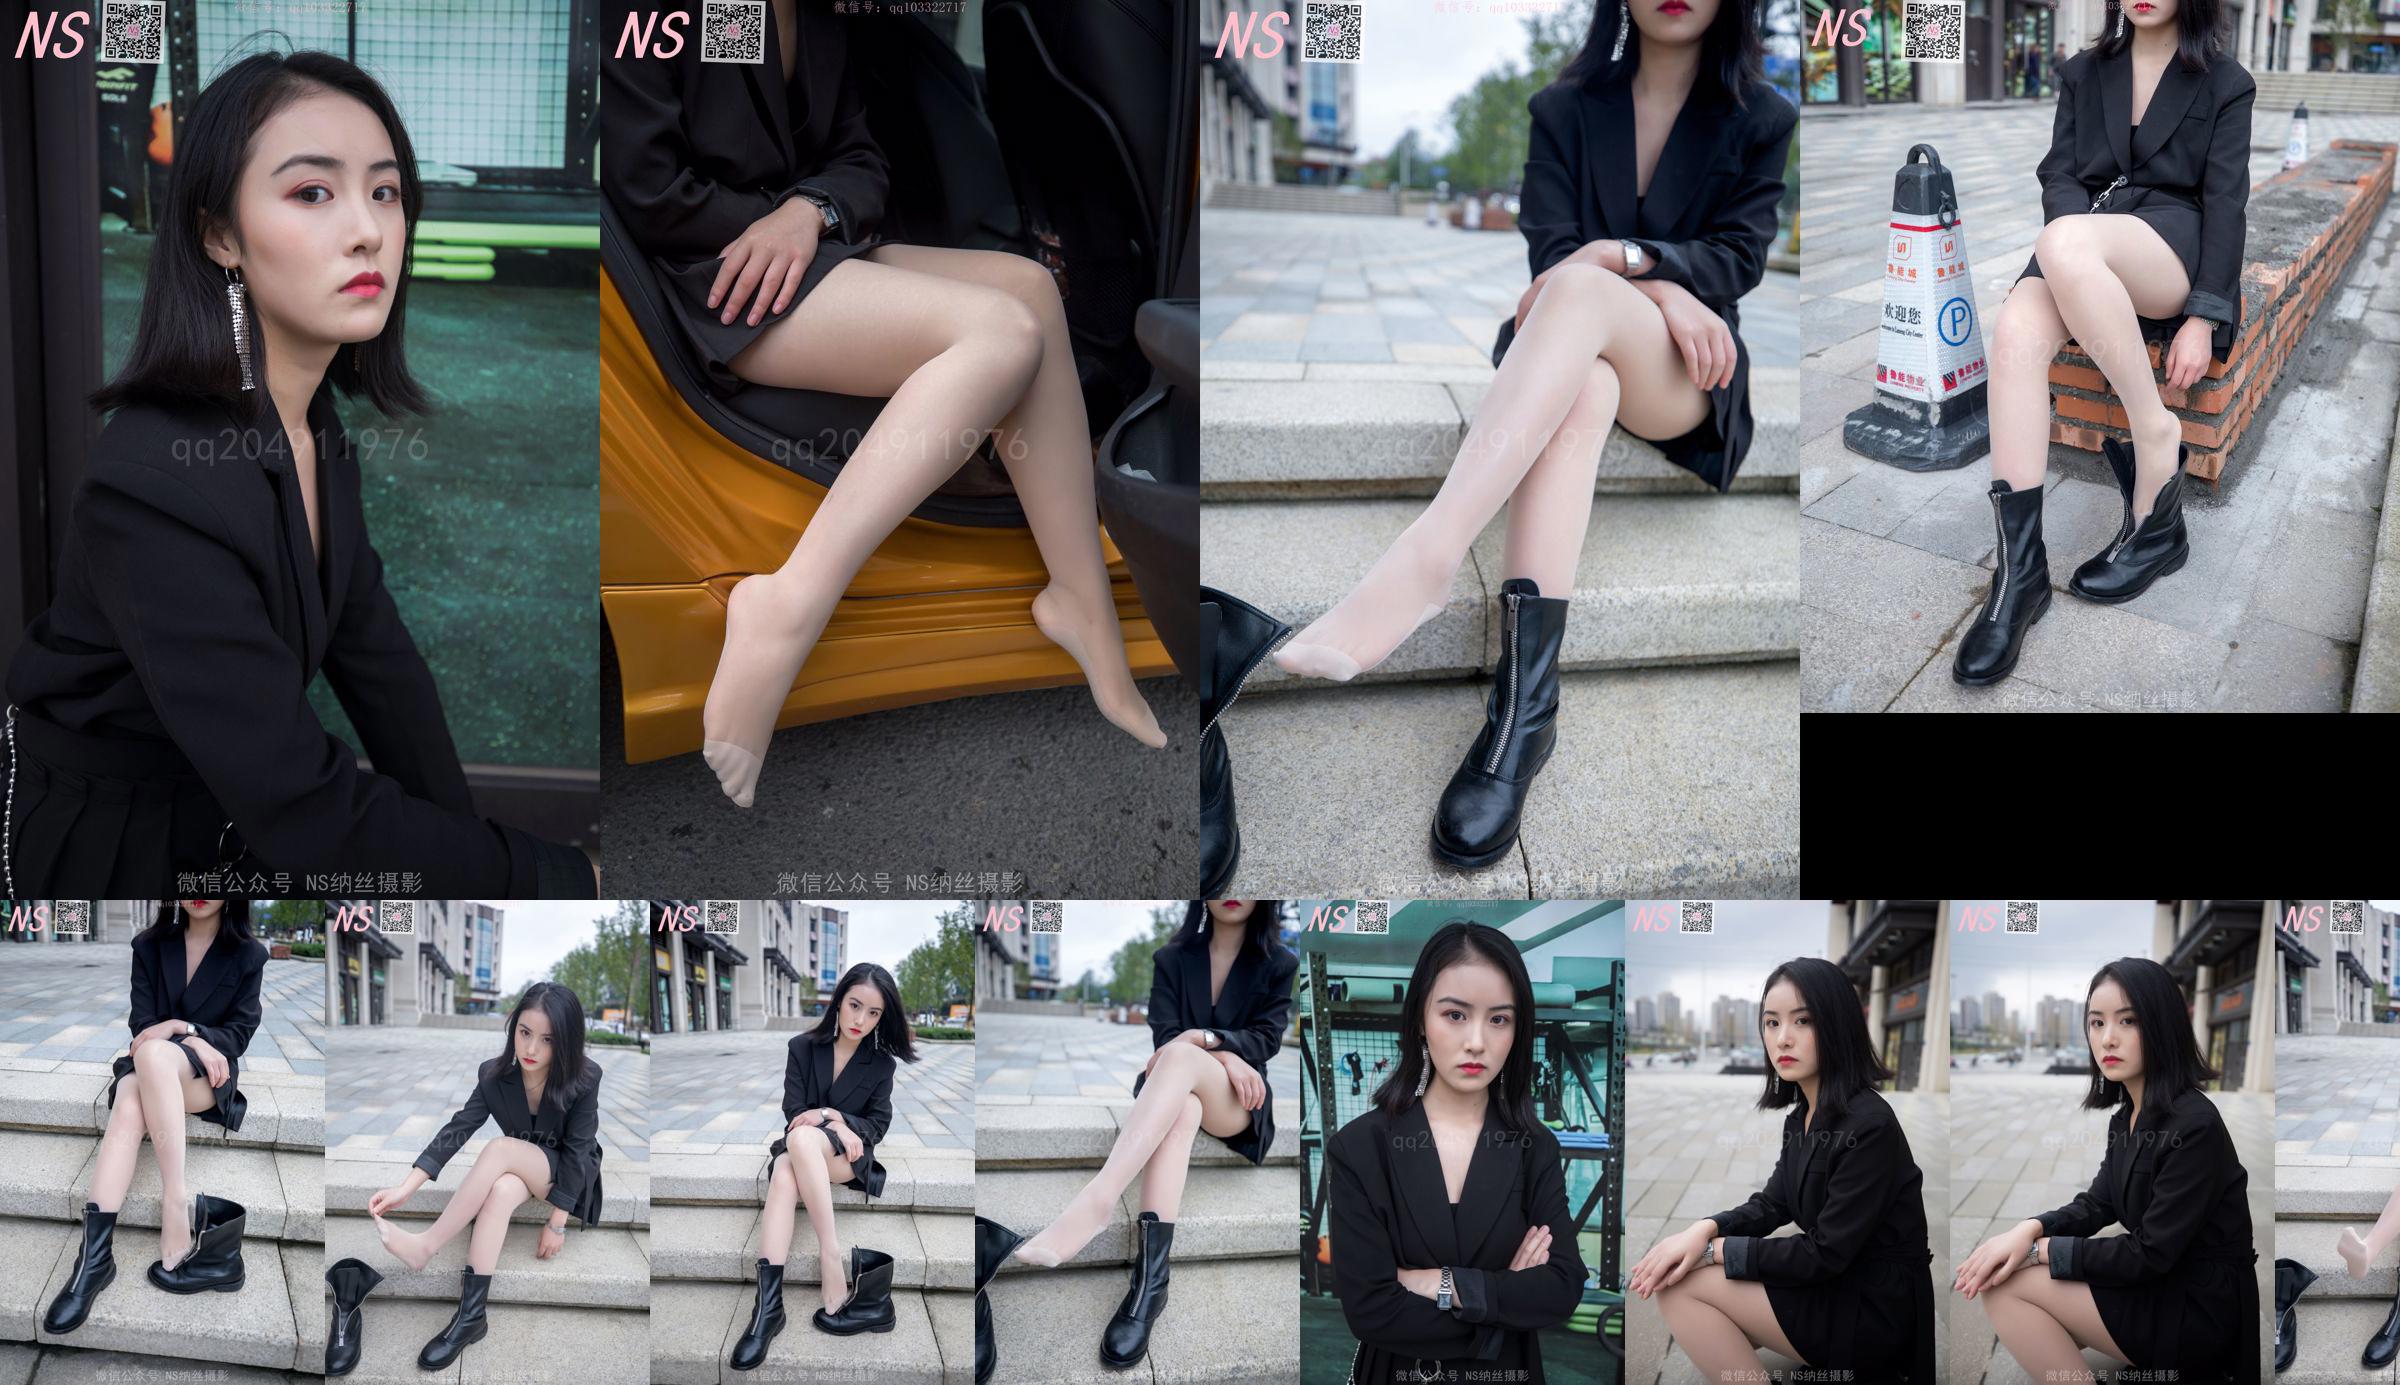 Yishuang "Special Wonderful Boots and Stockings" [Nass Photography] No.c6a9de Page 32